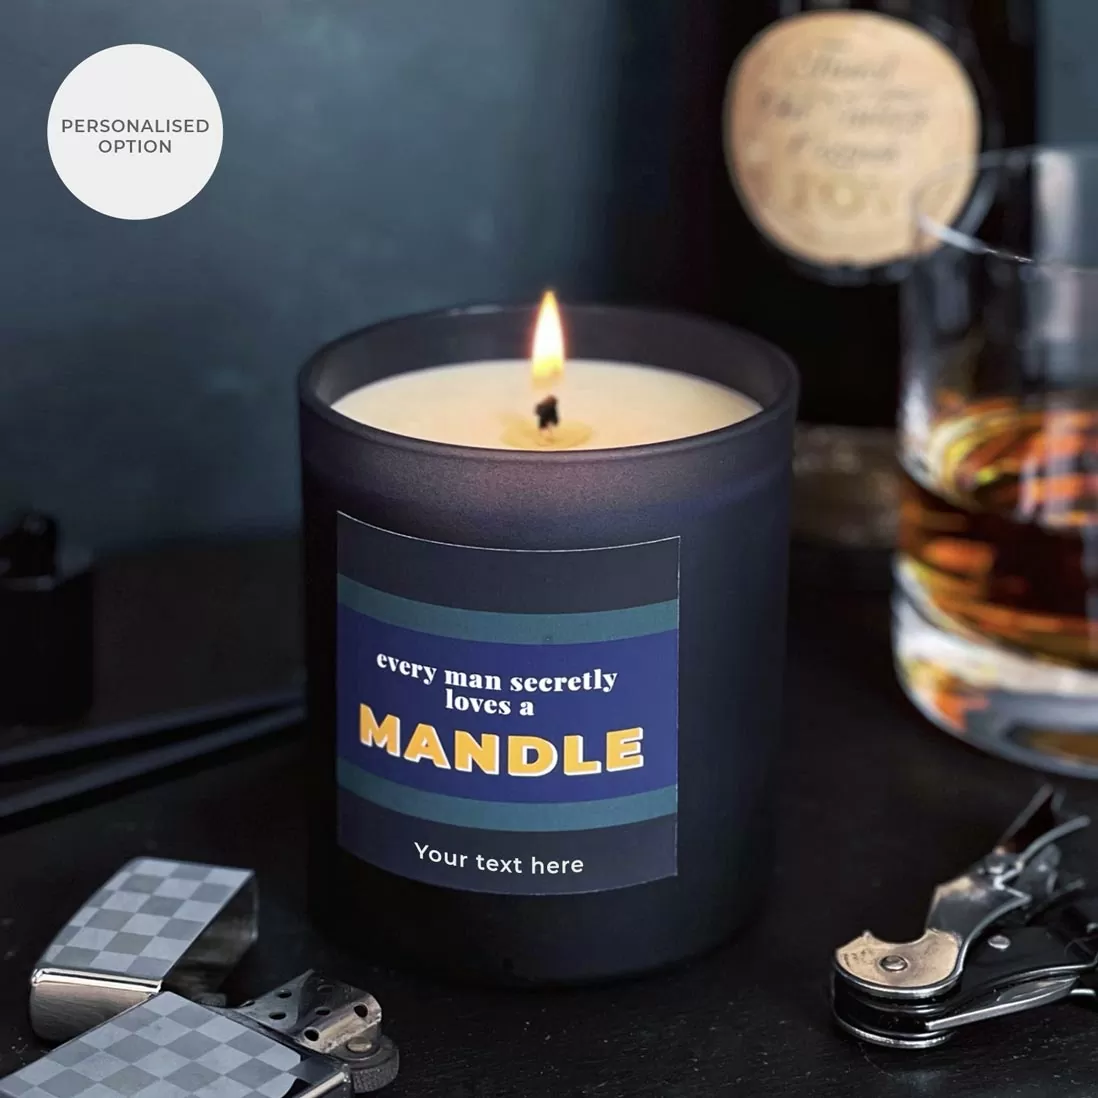 Personalised option for Mandle candle for men